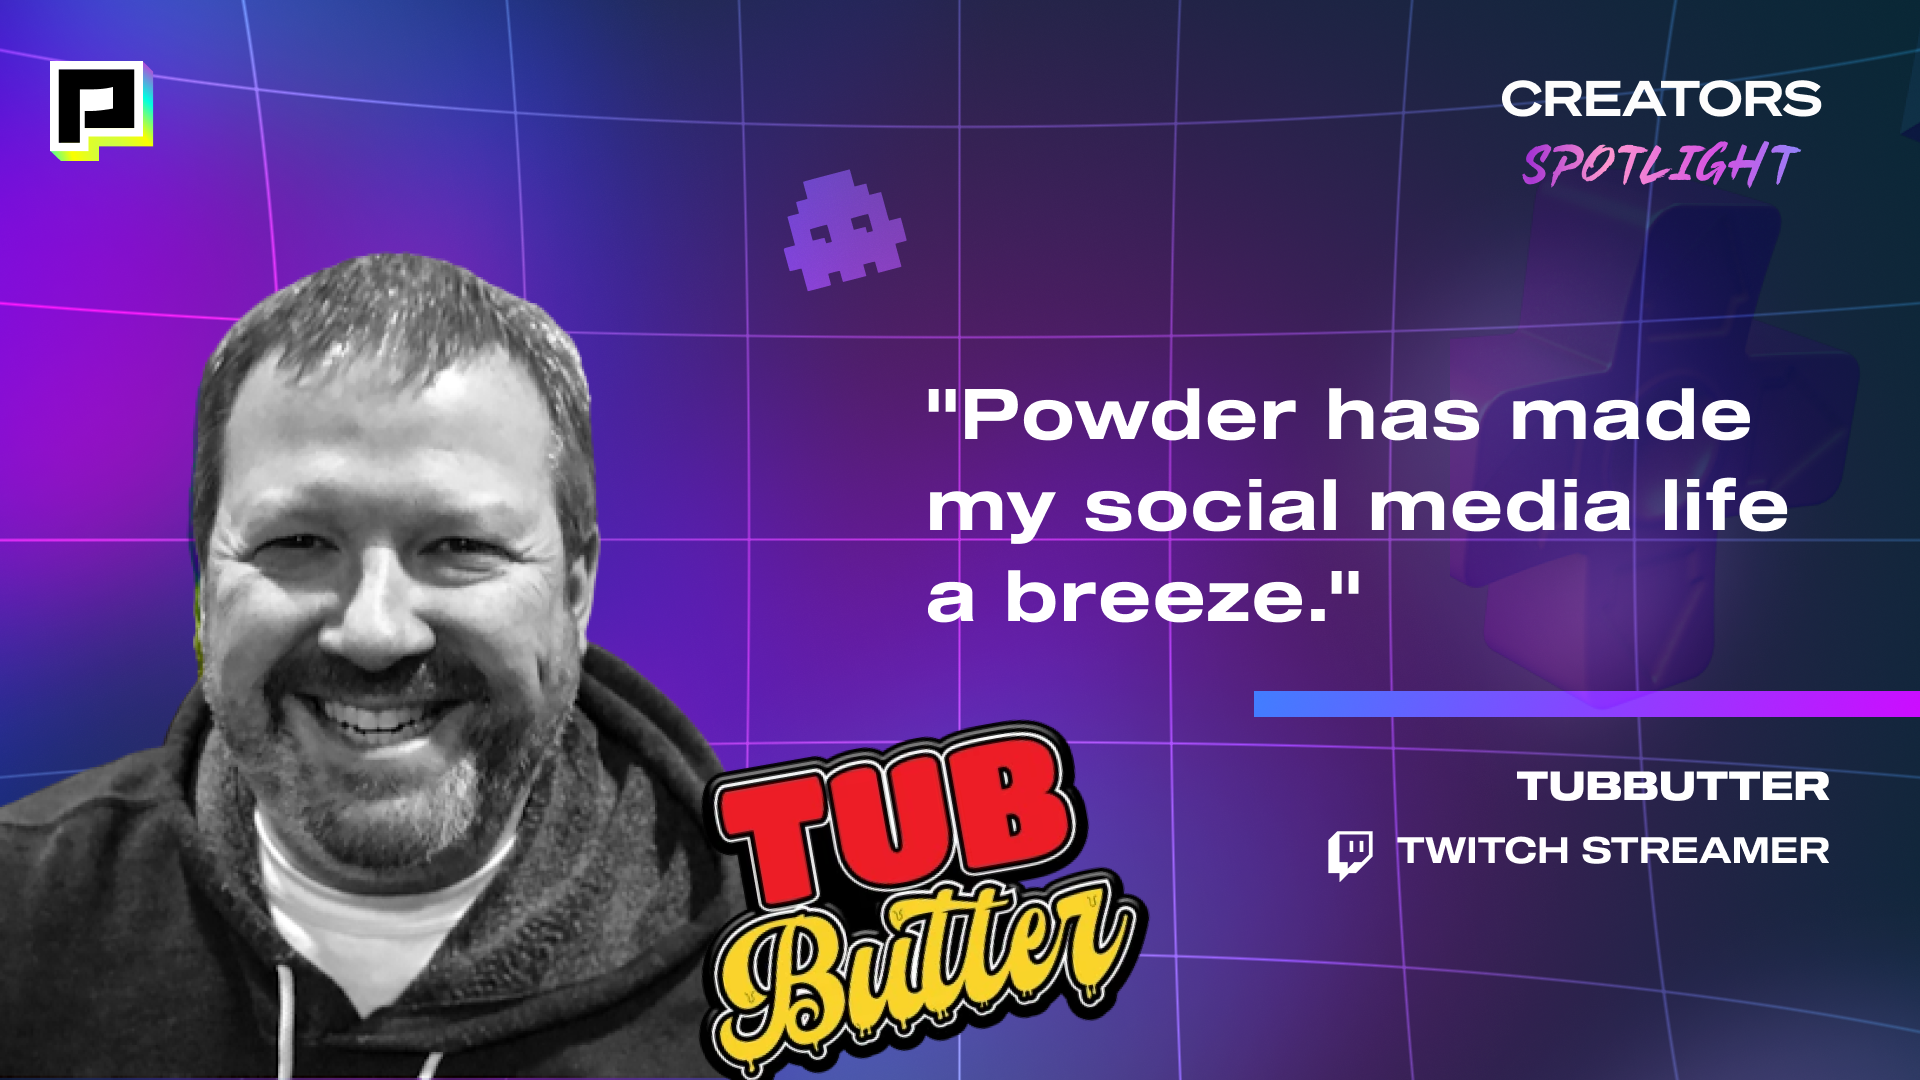 Image of Twitch Streamer, TUBBUTTER with his quote, "Powder has made my social media life a breeze."